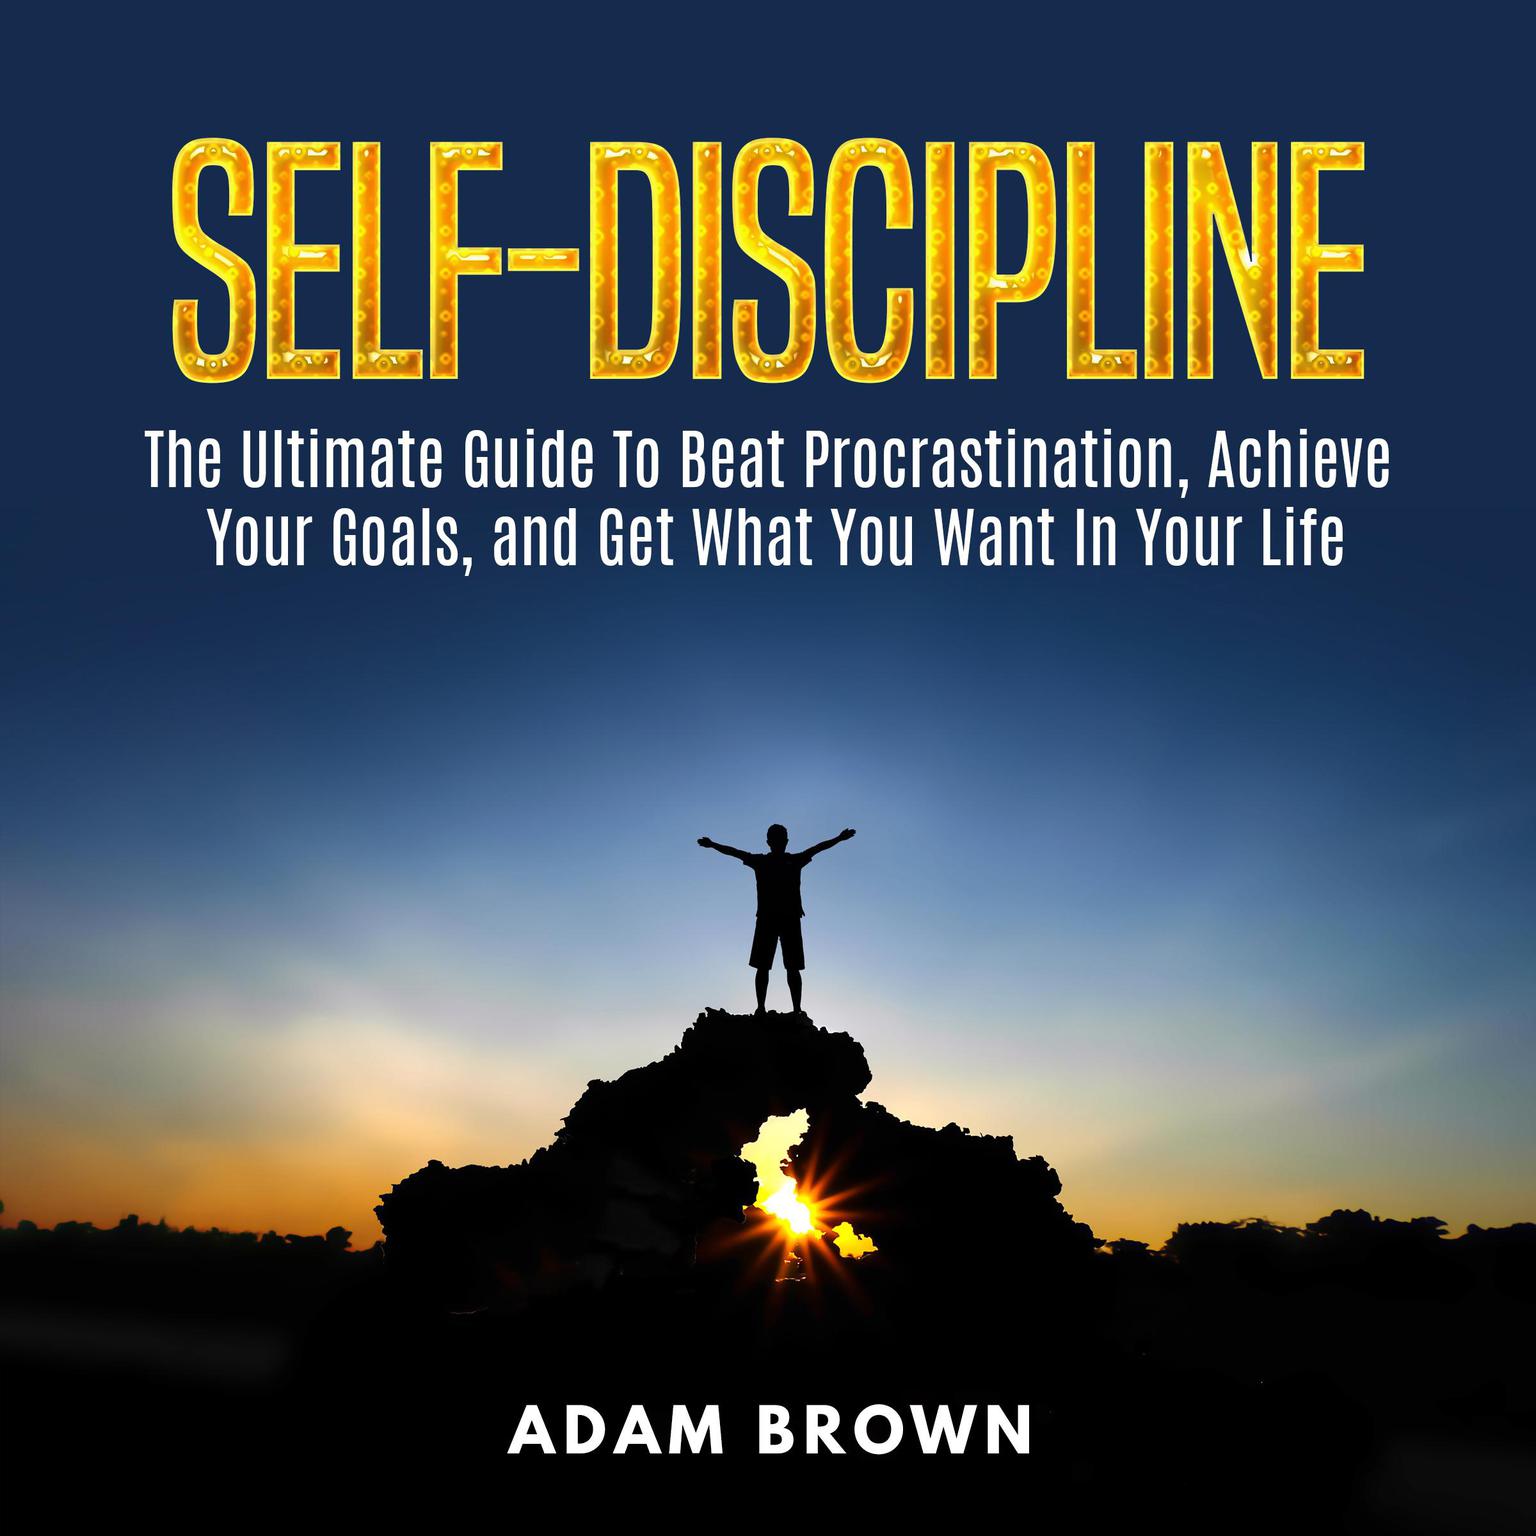 Self-Discipline: The Ultimate Guide To Beat Procrastination, Achieve Your Goals, and Get What You Want In Your Life: The Ultimate Guide To Beat Procrastination, Achieve Your Goals, and Get What You Want In Your Life Audiobook, by Adam Brown